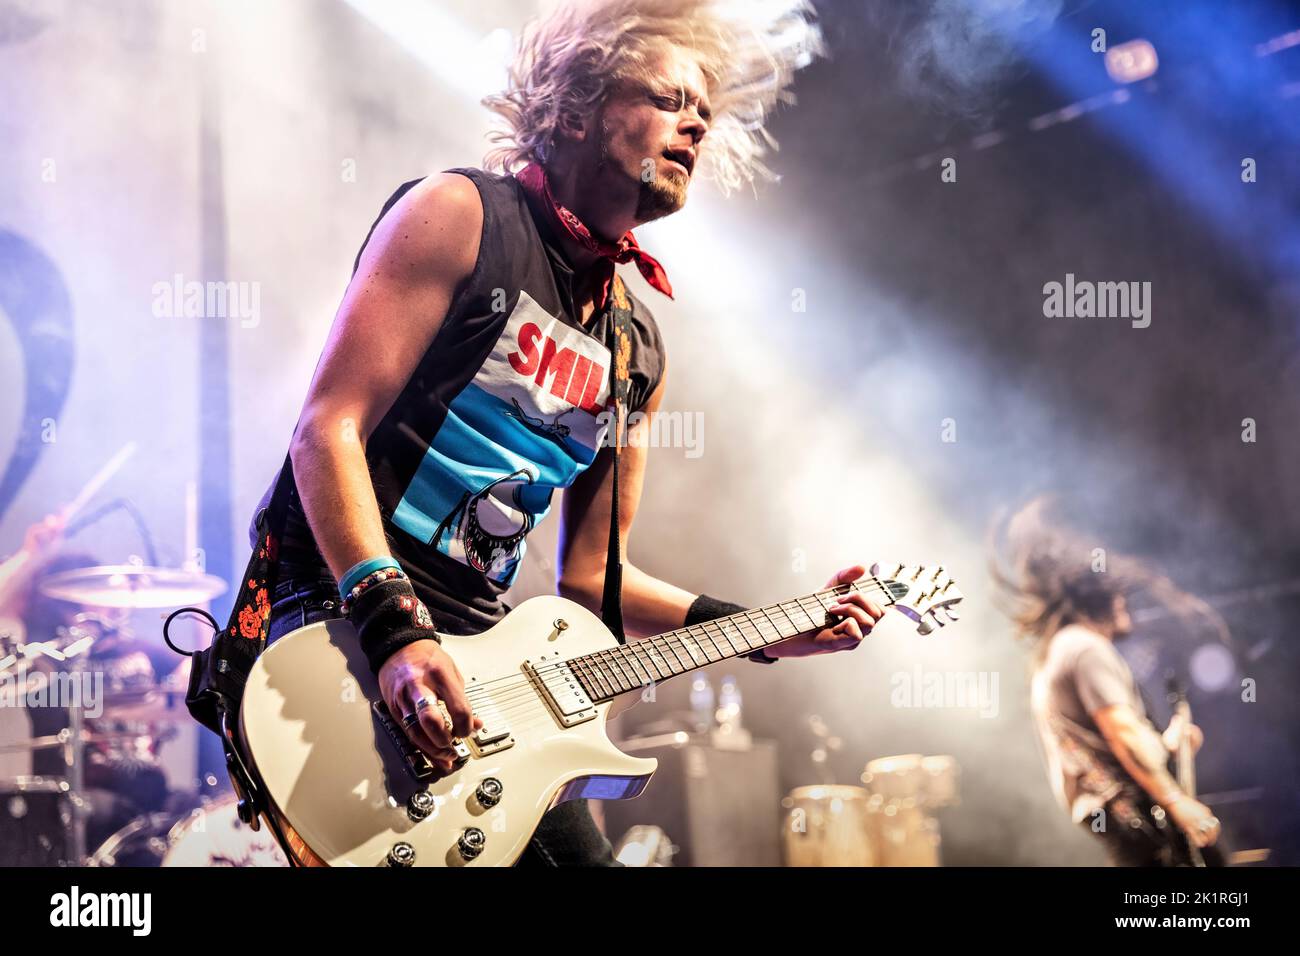 Oslo, Norway. 17th, September 2022. The American rock band Black Stone Cherry performs a live concert at Rockefeller in Oslo. Here guitarist Ben Wells is seen live on stage. (Photo credit: Gonzales Photo - Terje Dokken). Stock Photo